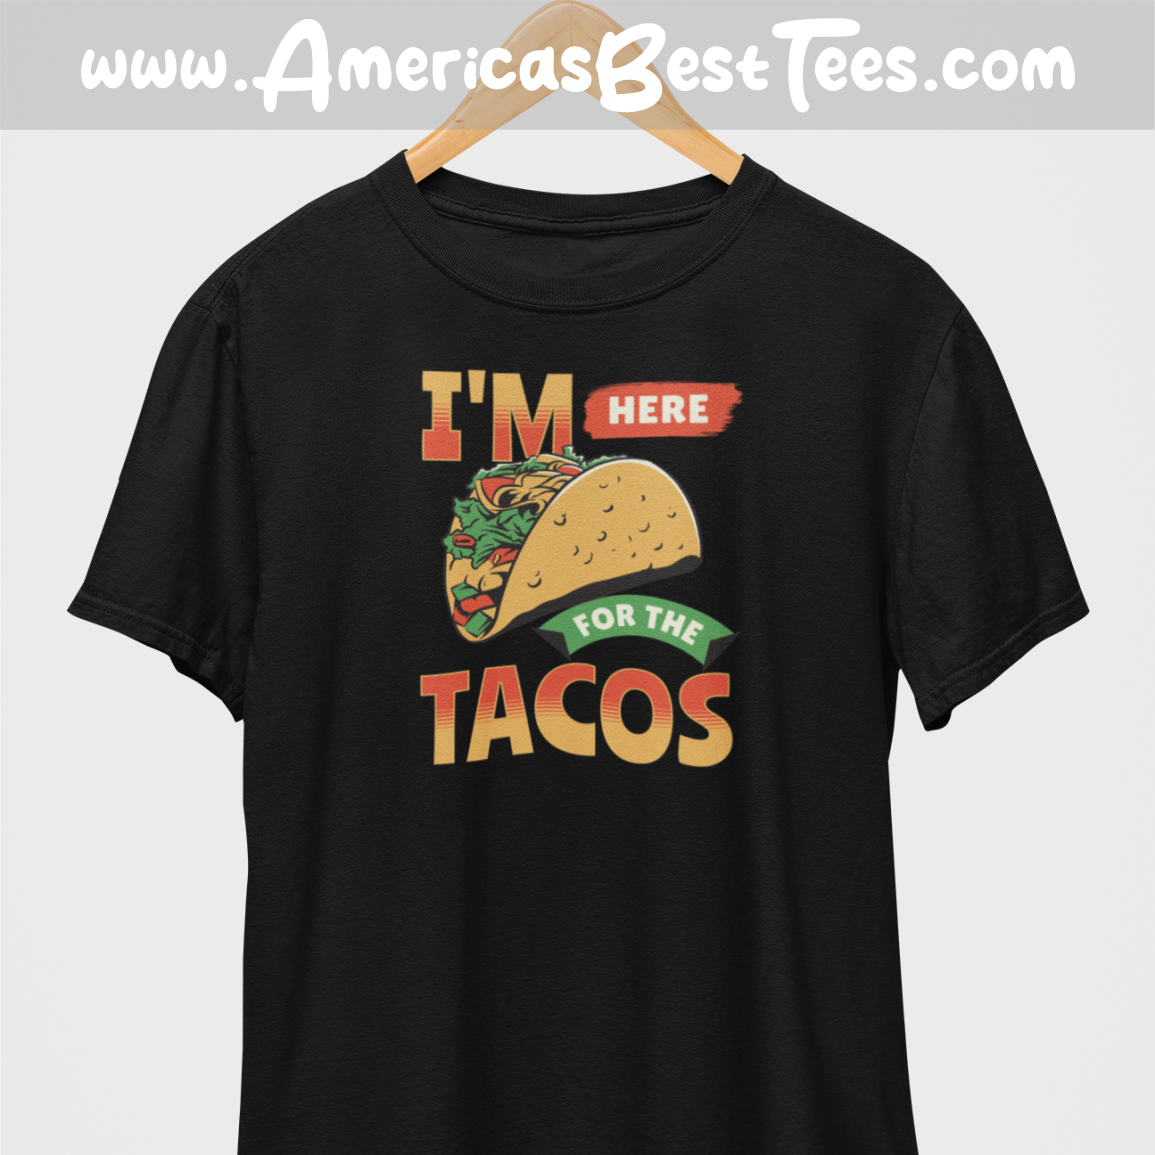 I'm Here For The Tacos T-Shirt